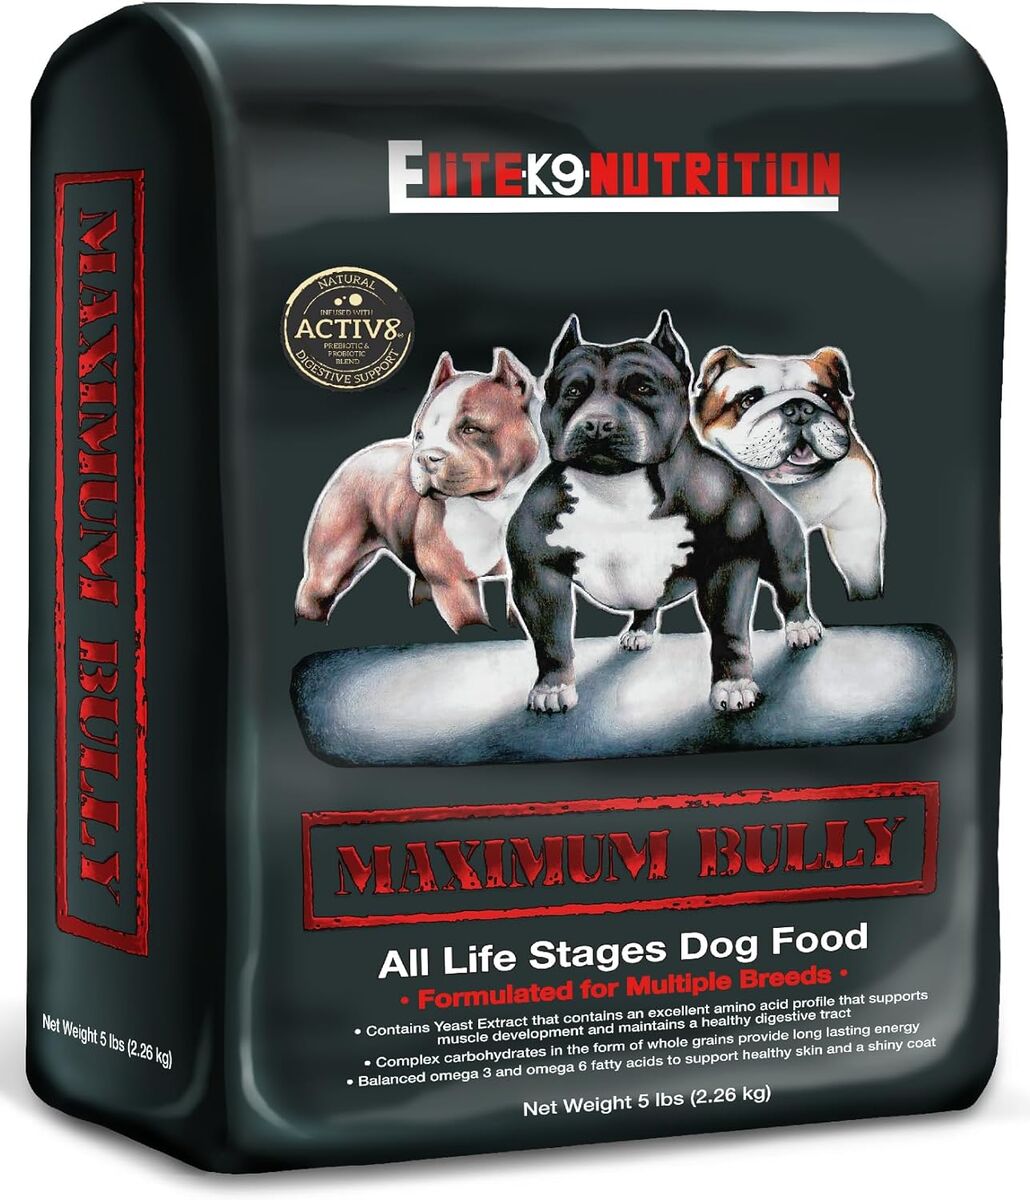 All Life Stages Dog Food